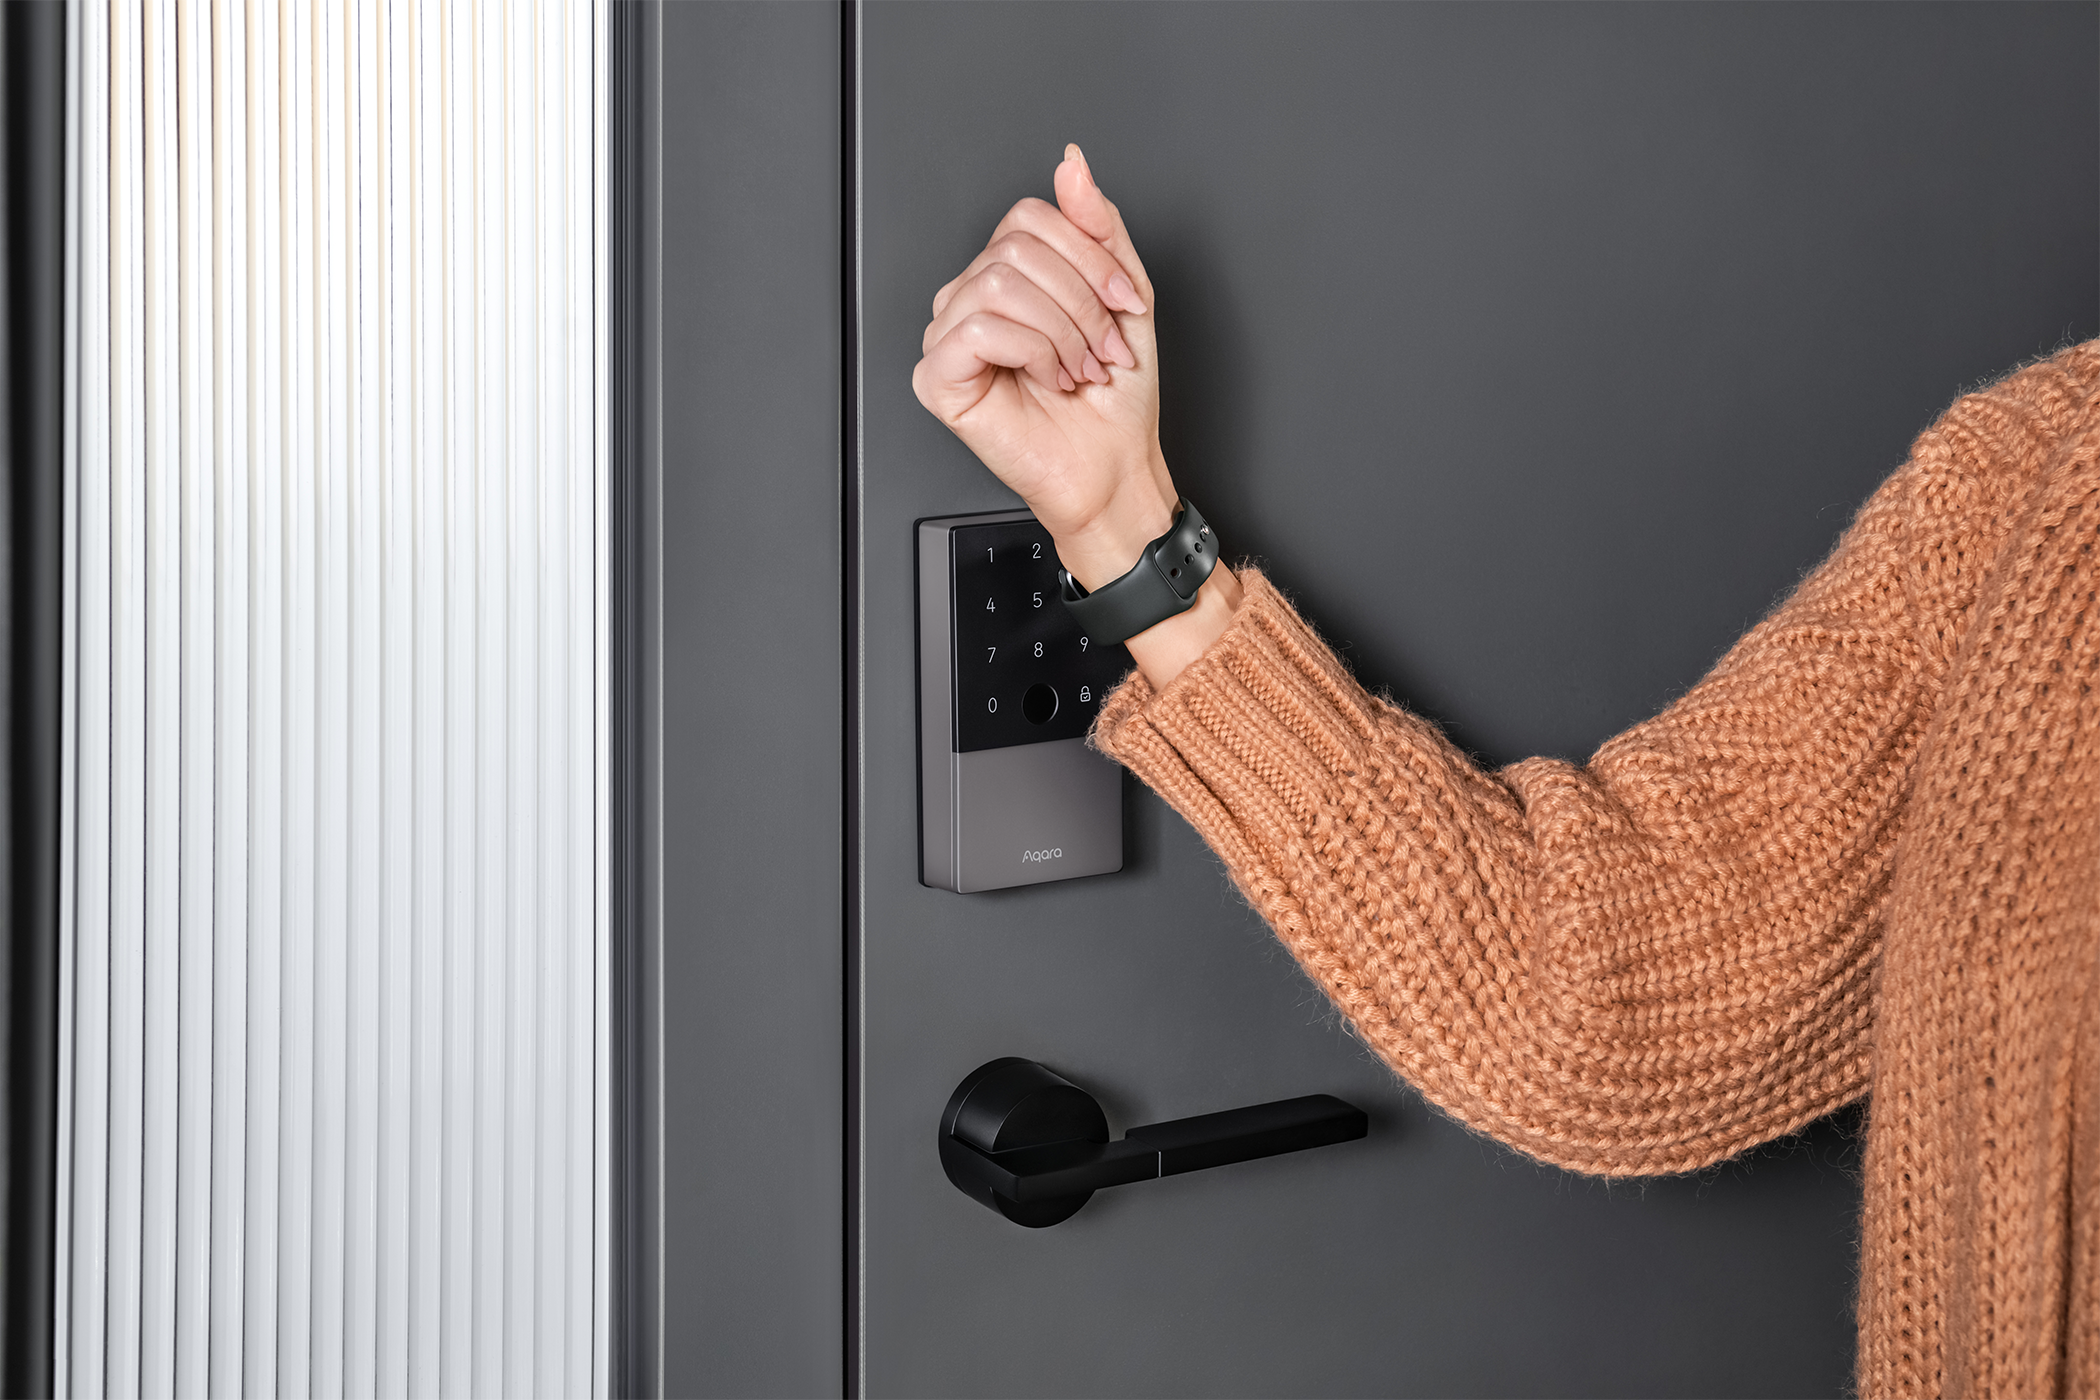 A woman opens her smart lock using her Apple Watch